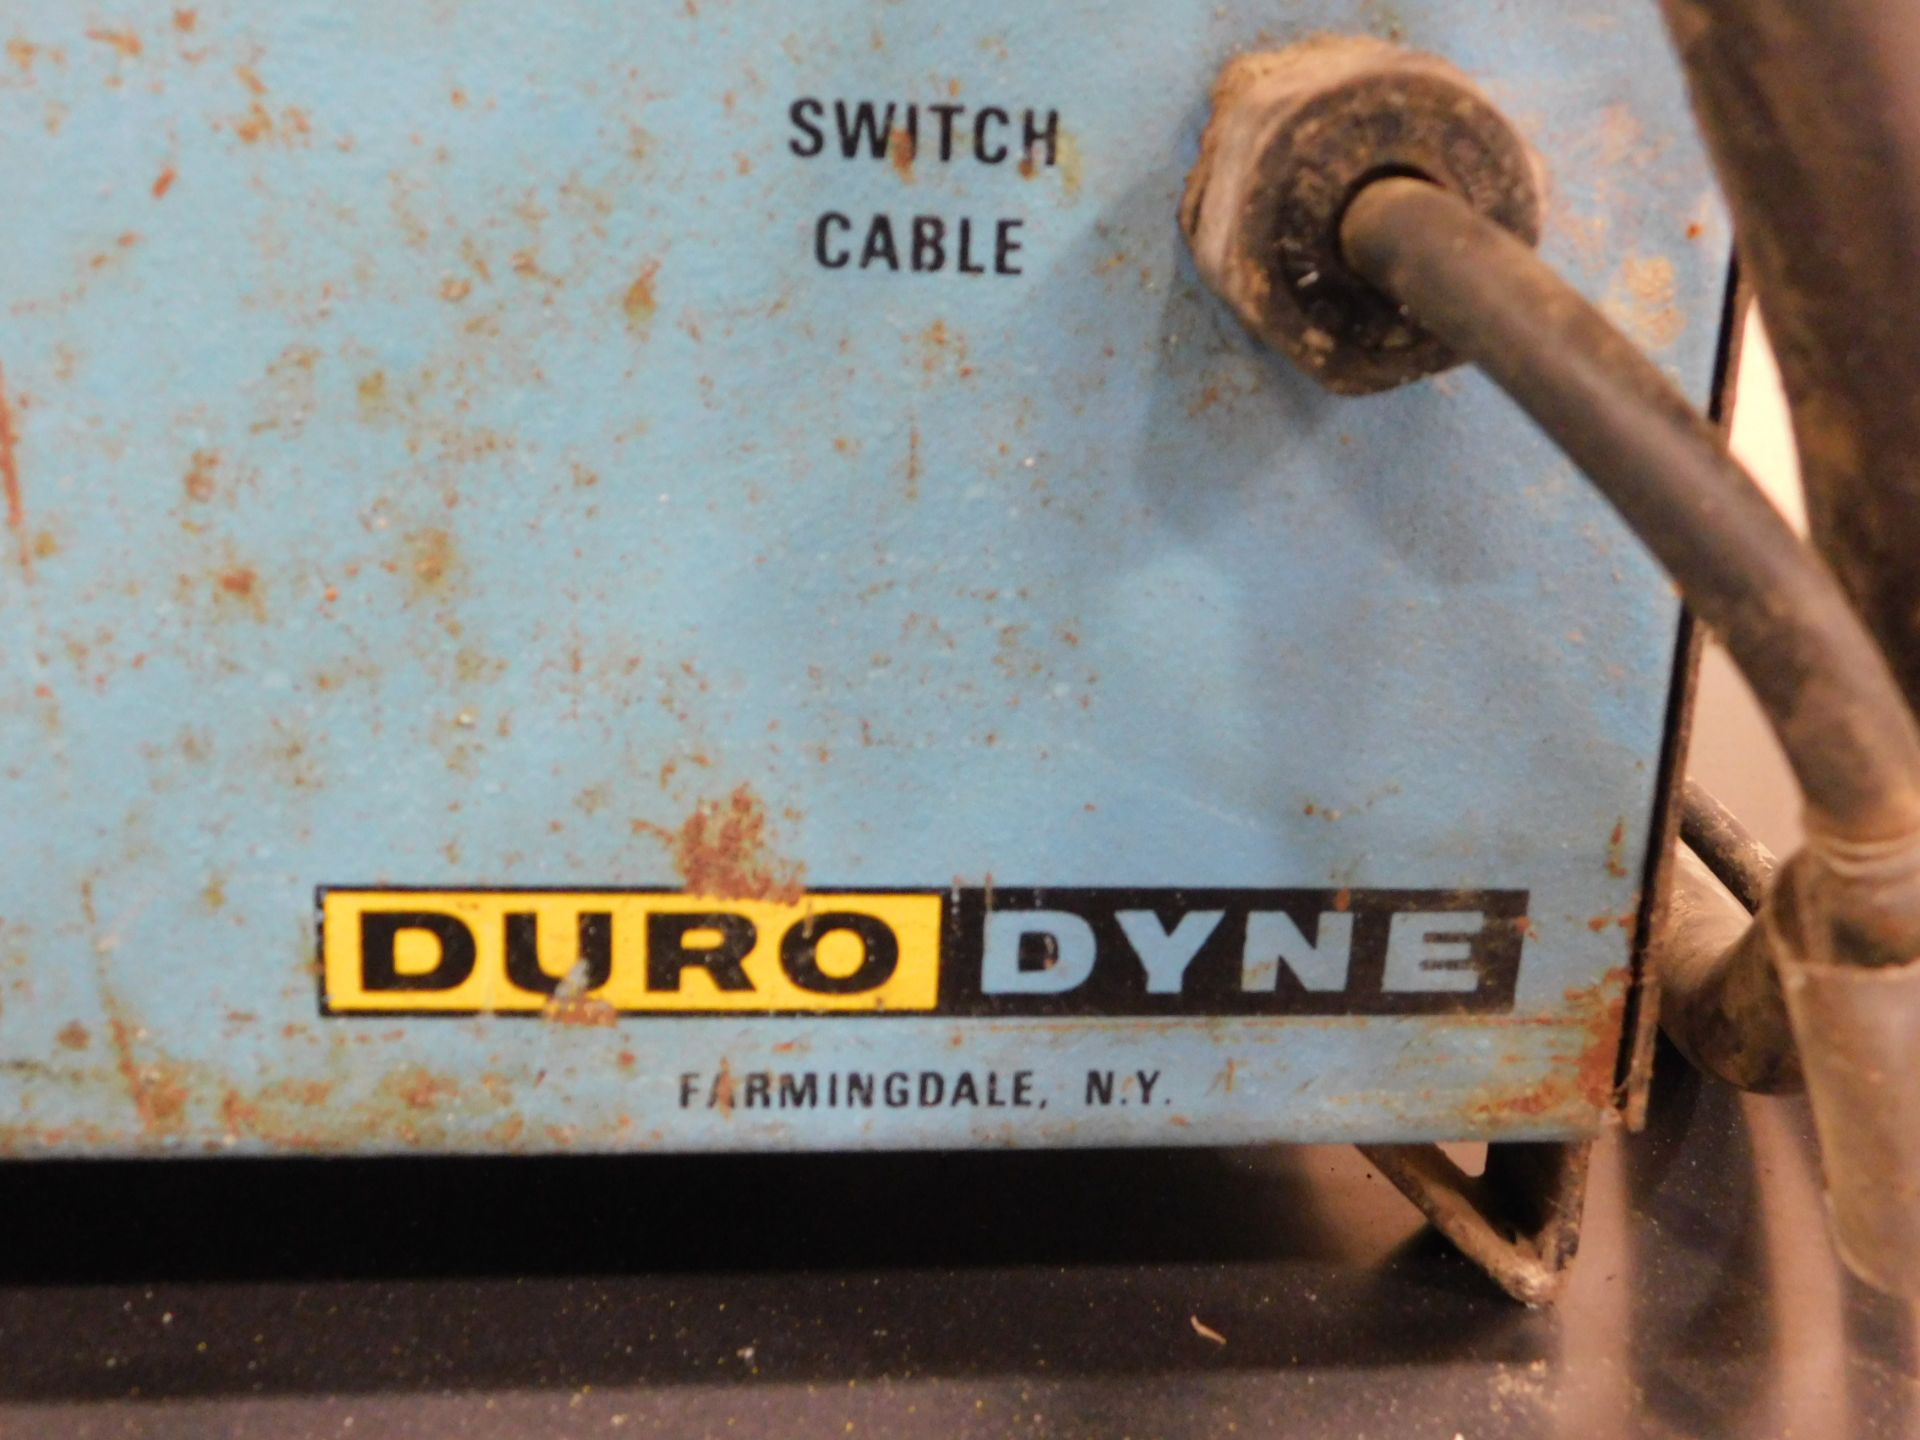 Duro Dyne Model MF Compact Pinspotter - Image 5 of 6